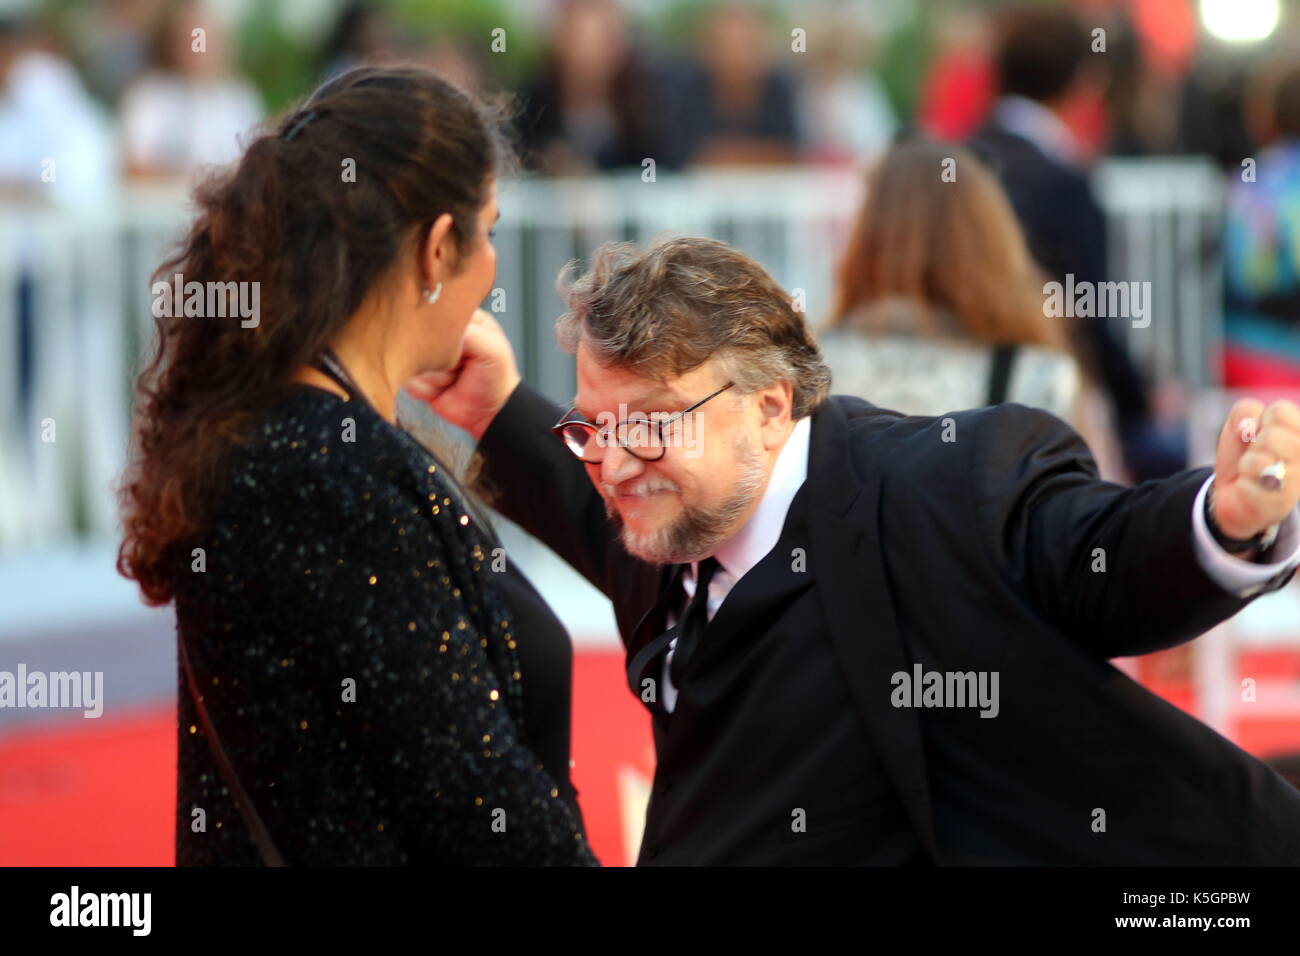 Venice, Italy. 9th September, 2017. Director Guillermo Del Toro attends at the Award Ceremony during the 74th Venice International Film Festival at Lido of Venice on 9th September, 2017. Credit: Andrea Spinelli/Alamy Live News Stock Photo